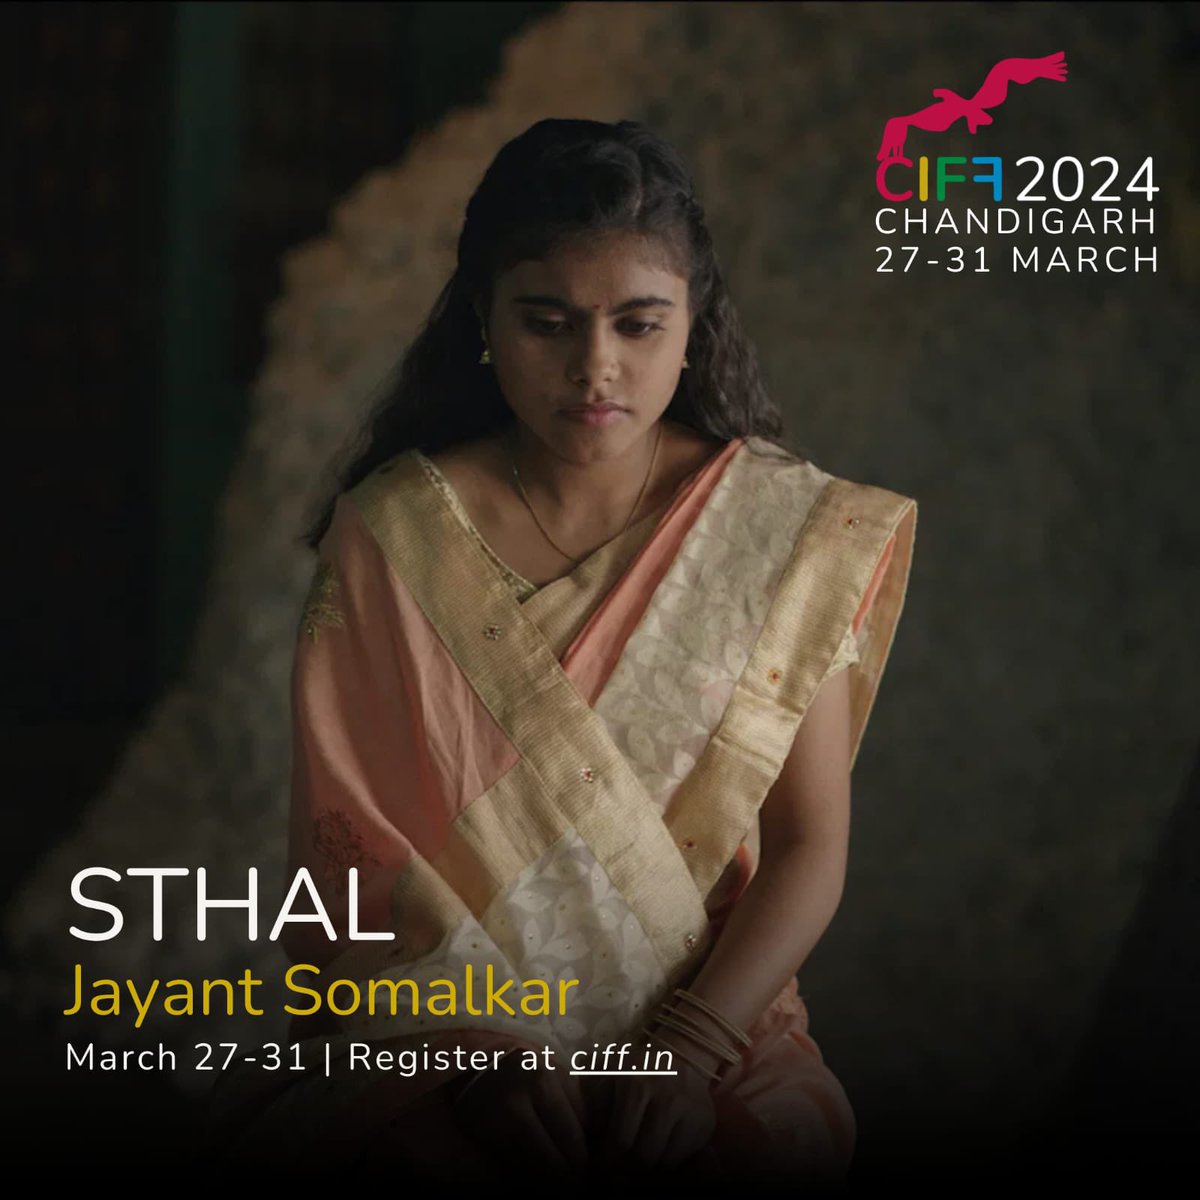 ‘STHAL’ screening at the Cinevesture International Film Festival, Chandigarh 2024. @CIFF2024 Saturday, 30th March @ 2:10 PM Audi 1, Cinepolis, Sector 17 #Sthal #AMatch #CIFF24 #Cinevesture @shefalibhushan @9_kg9